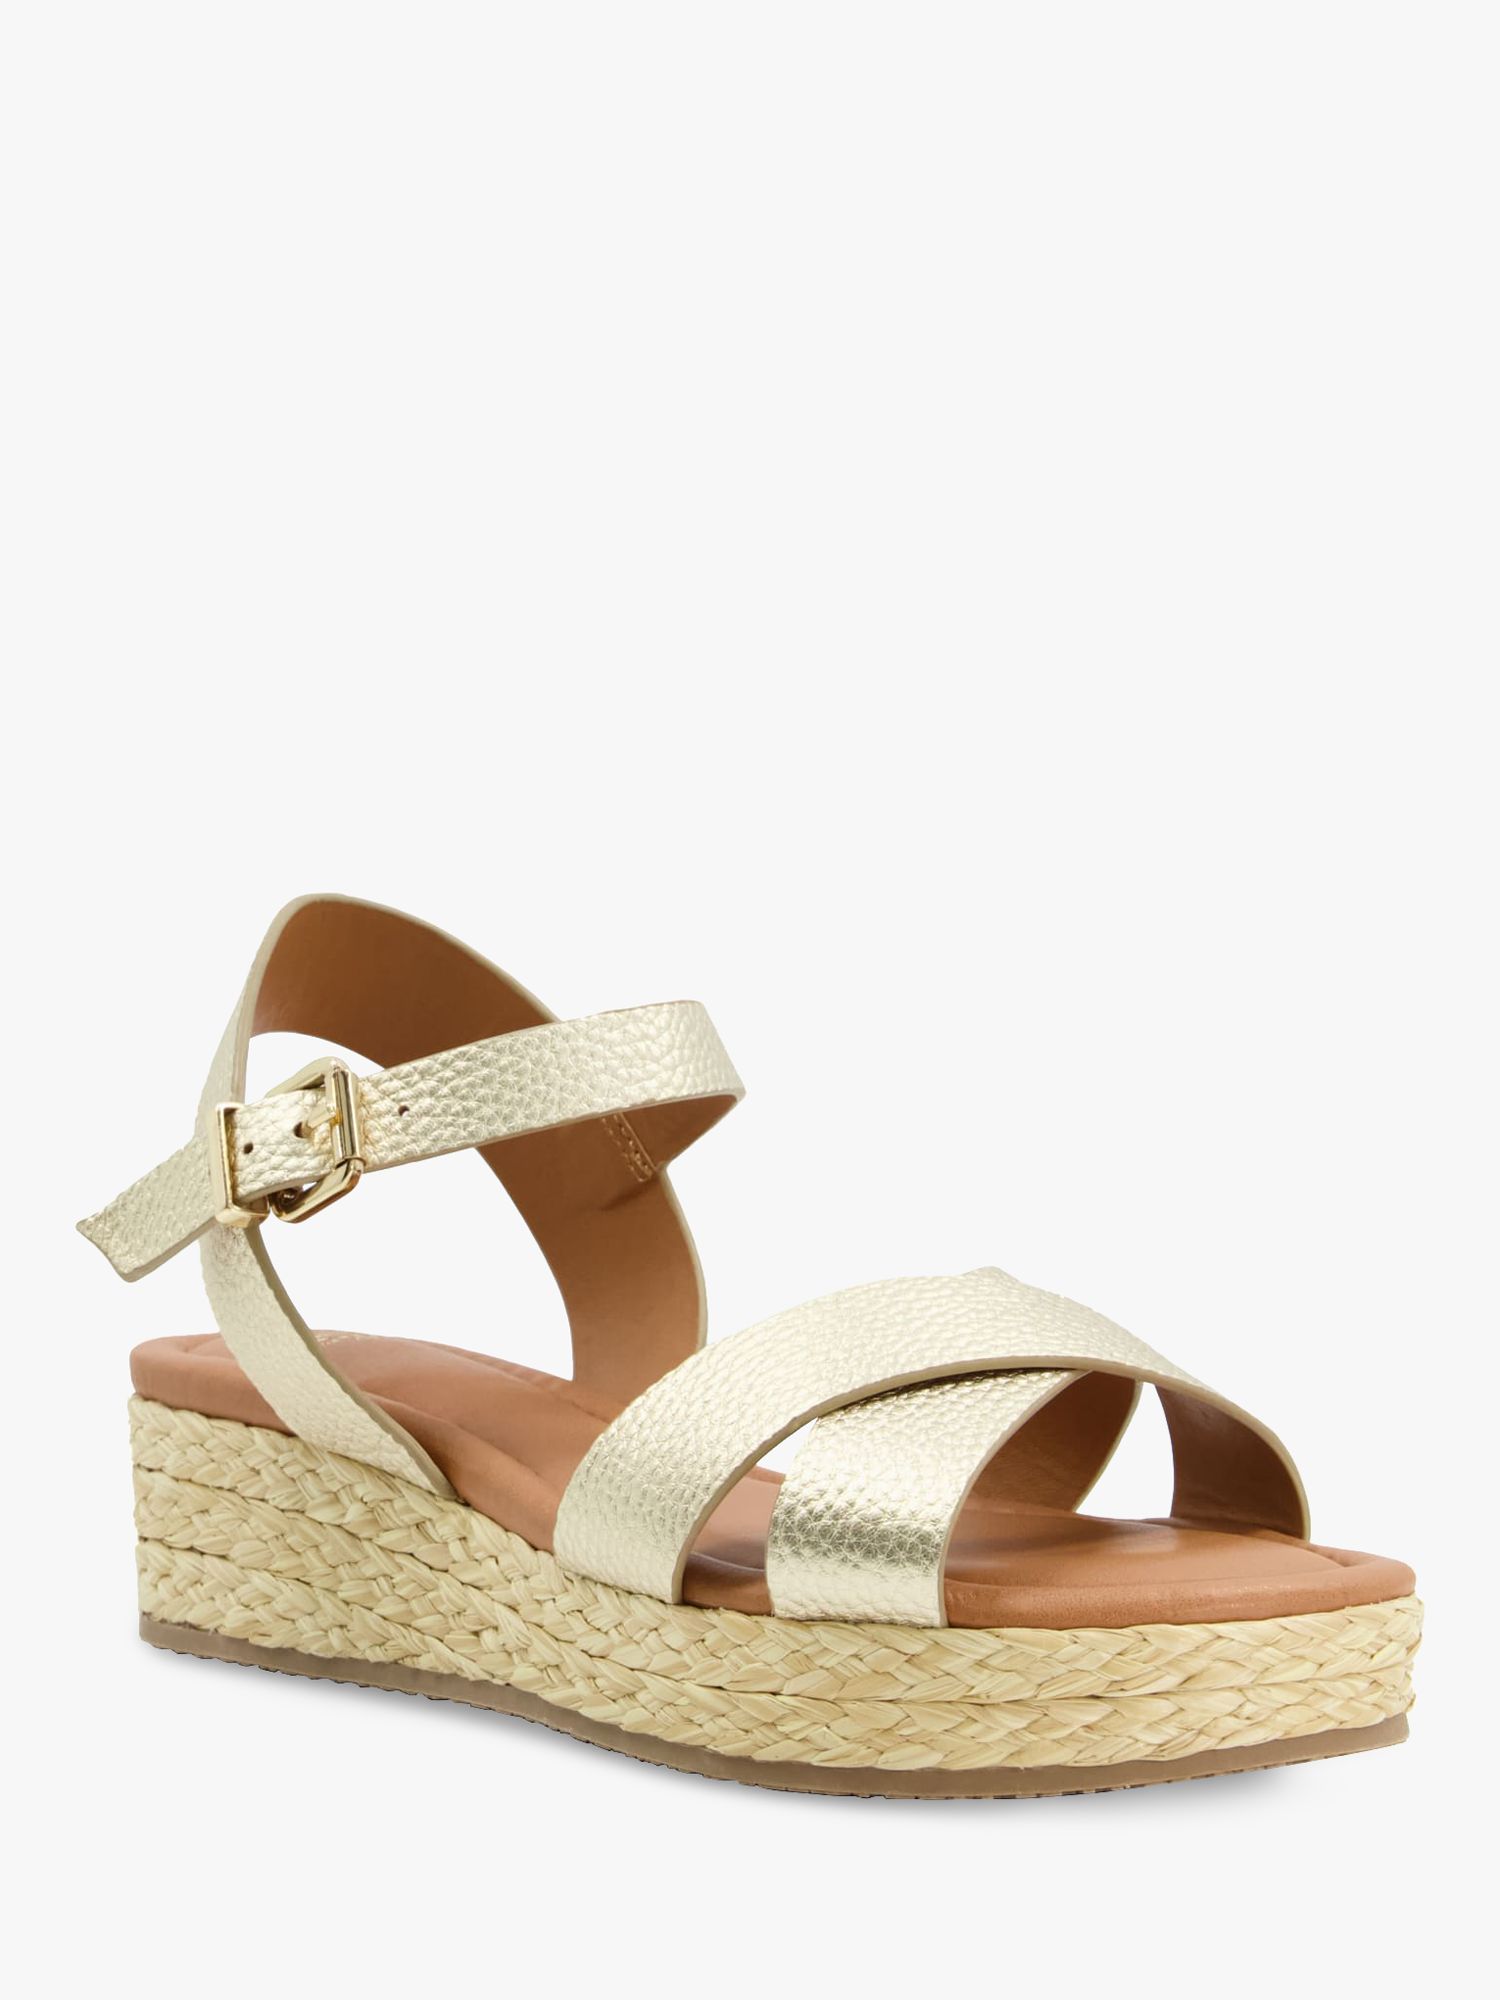 Dune Linnie Leather Cross Strap Sandals, Gold, 3